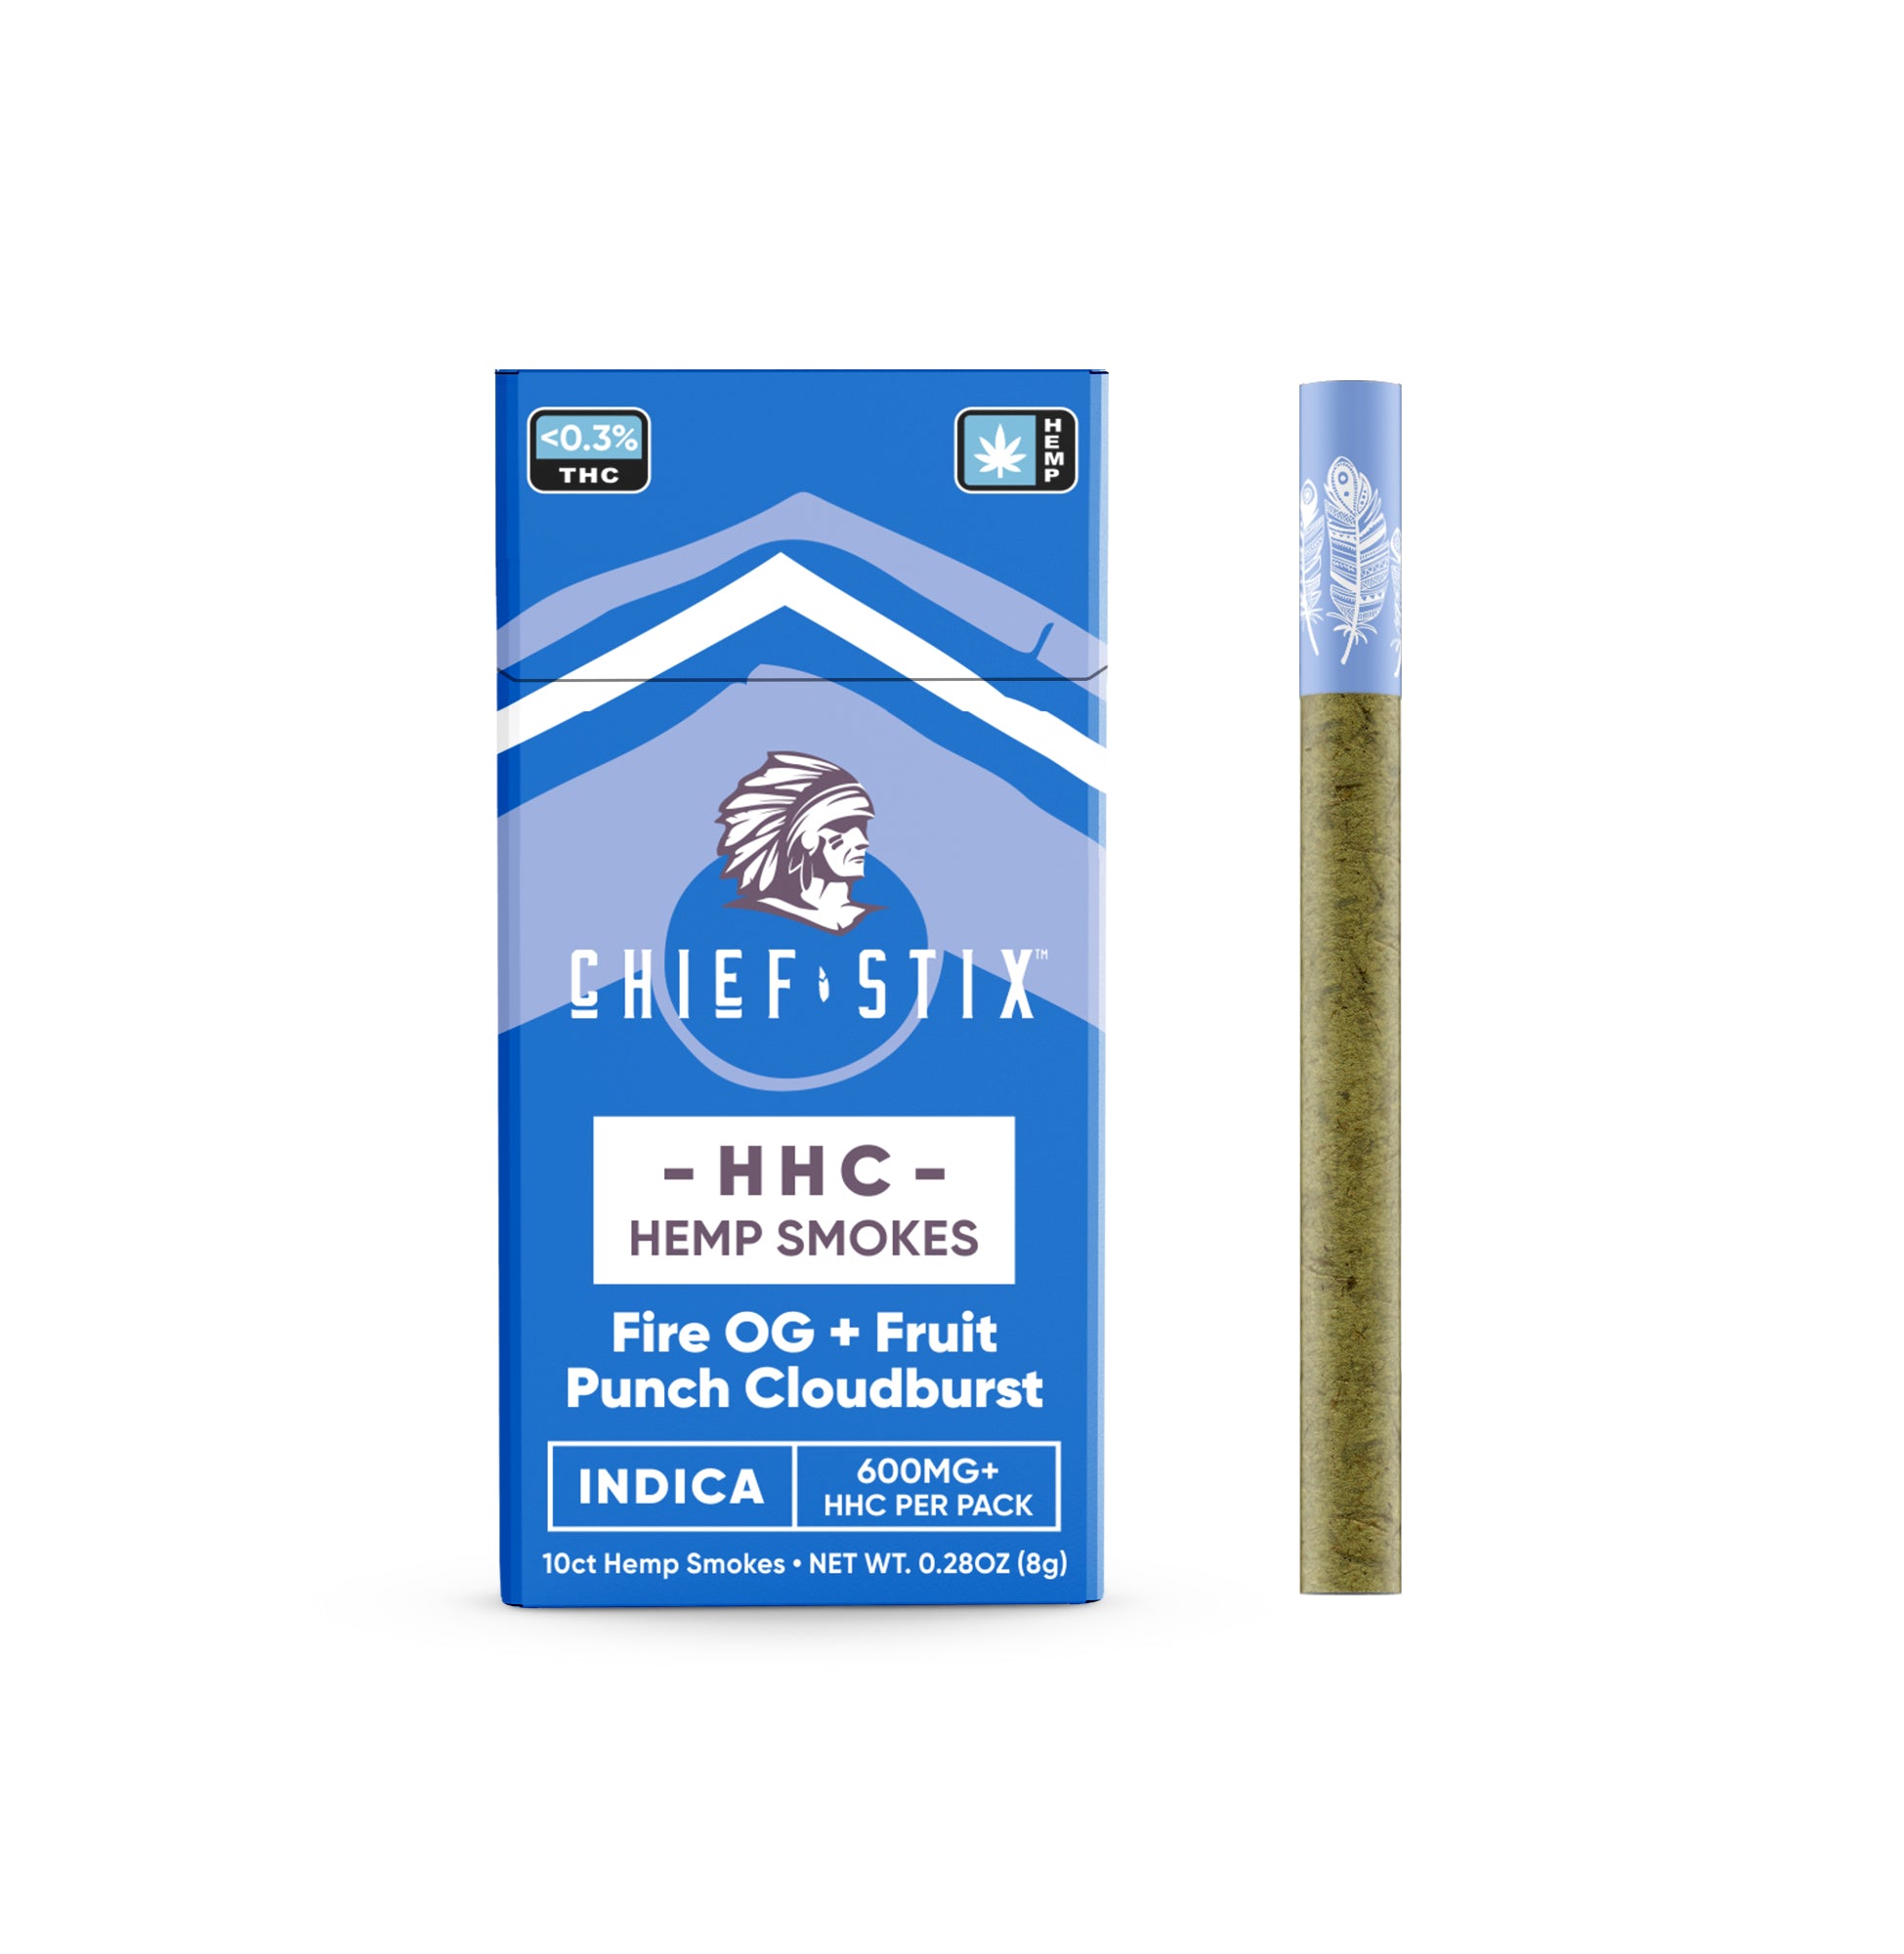 Chief Stix HHC Infused Hemp Smokes Fire OG + Fruit Punch Indica 600mg (10ct) - Carton